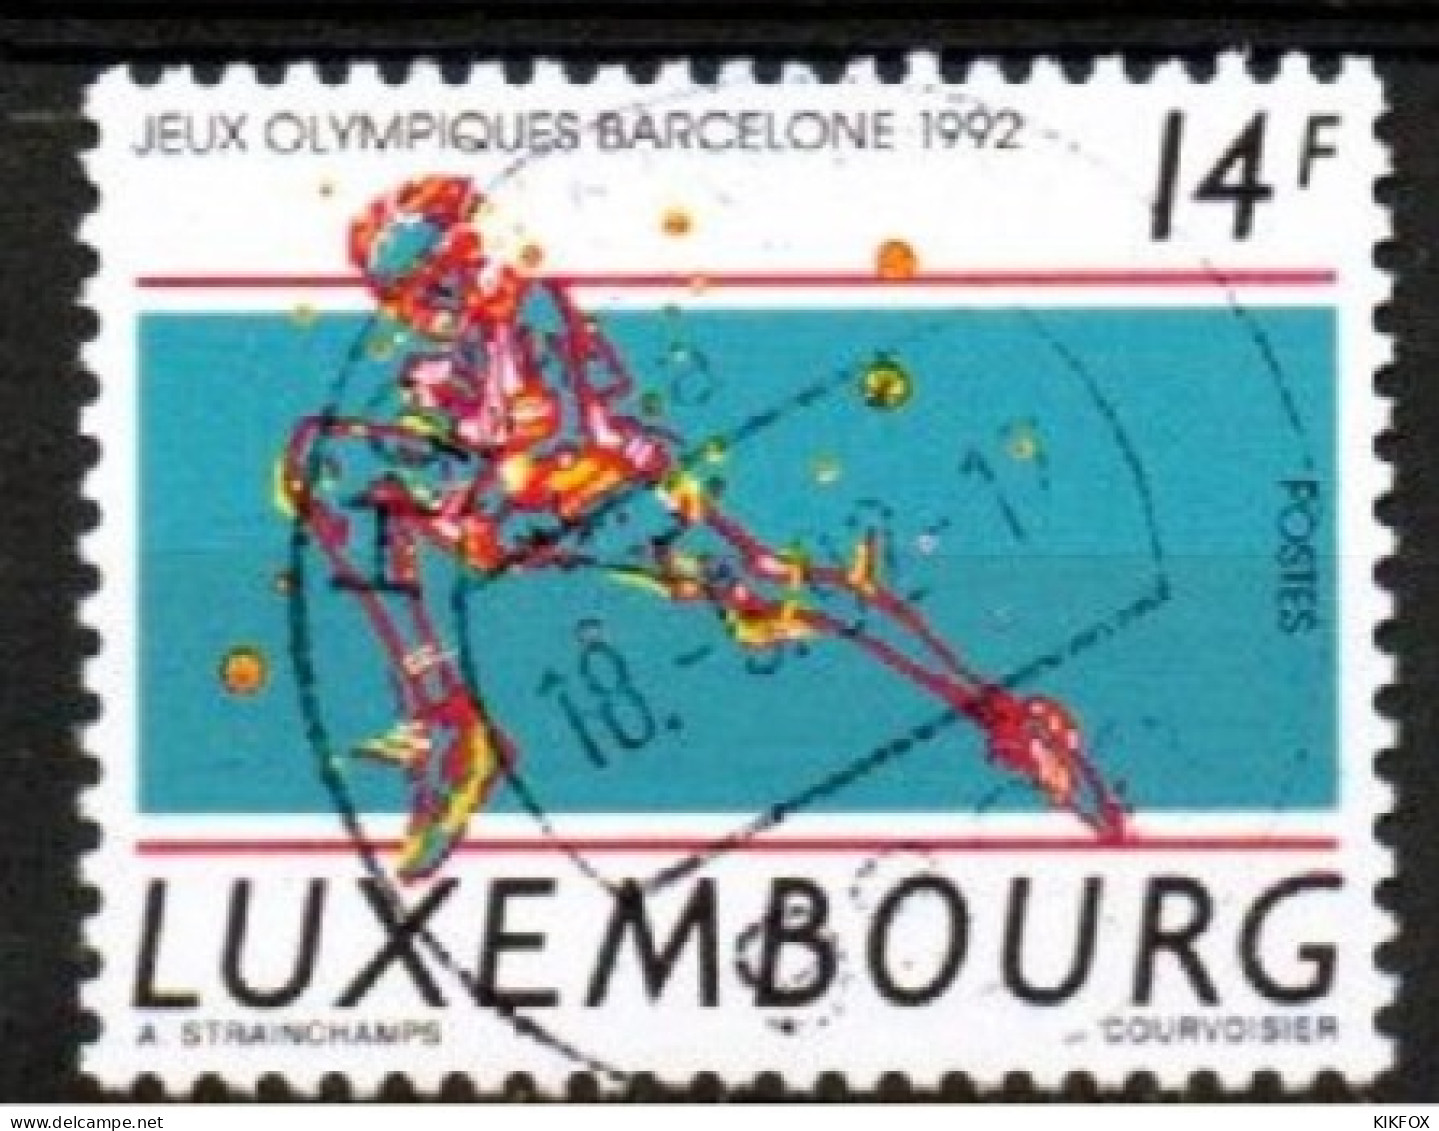 LUXEMBOURG, LUXEMBURG 1992,  MI 1297, YT 1248, OLYMPISCHE SOMMERSPIELE, BARCELONA,   GESTEMPELT, OBLITÉRÉ - Used Stamps